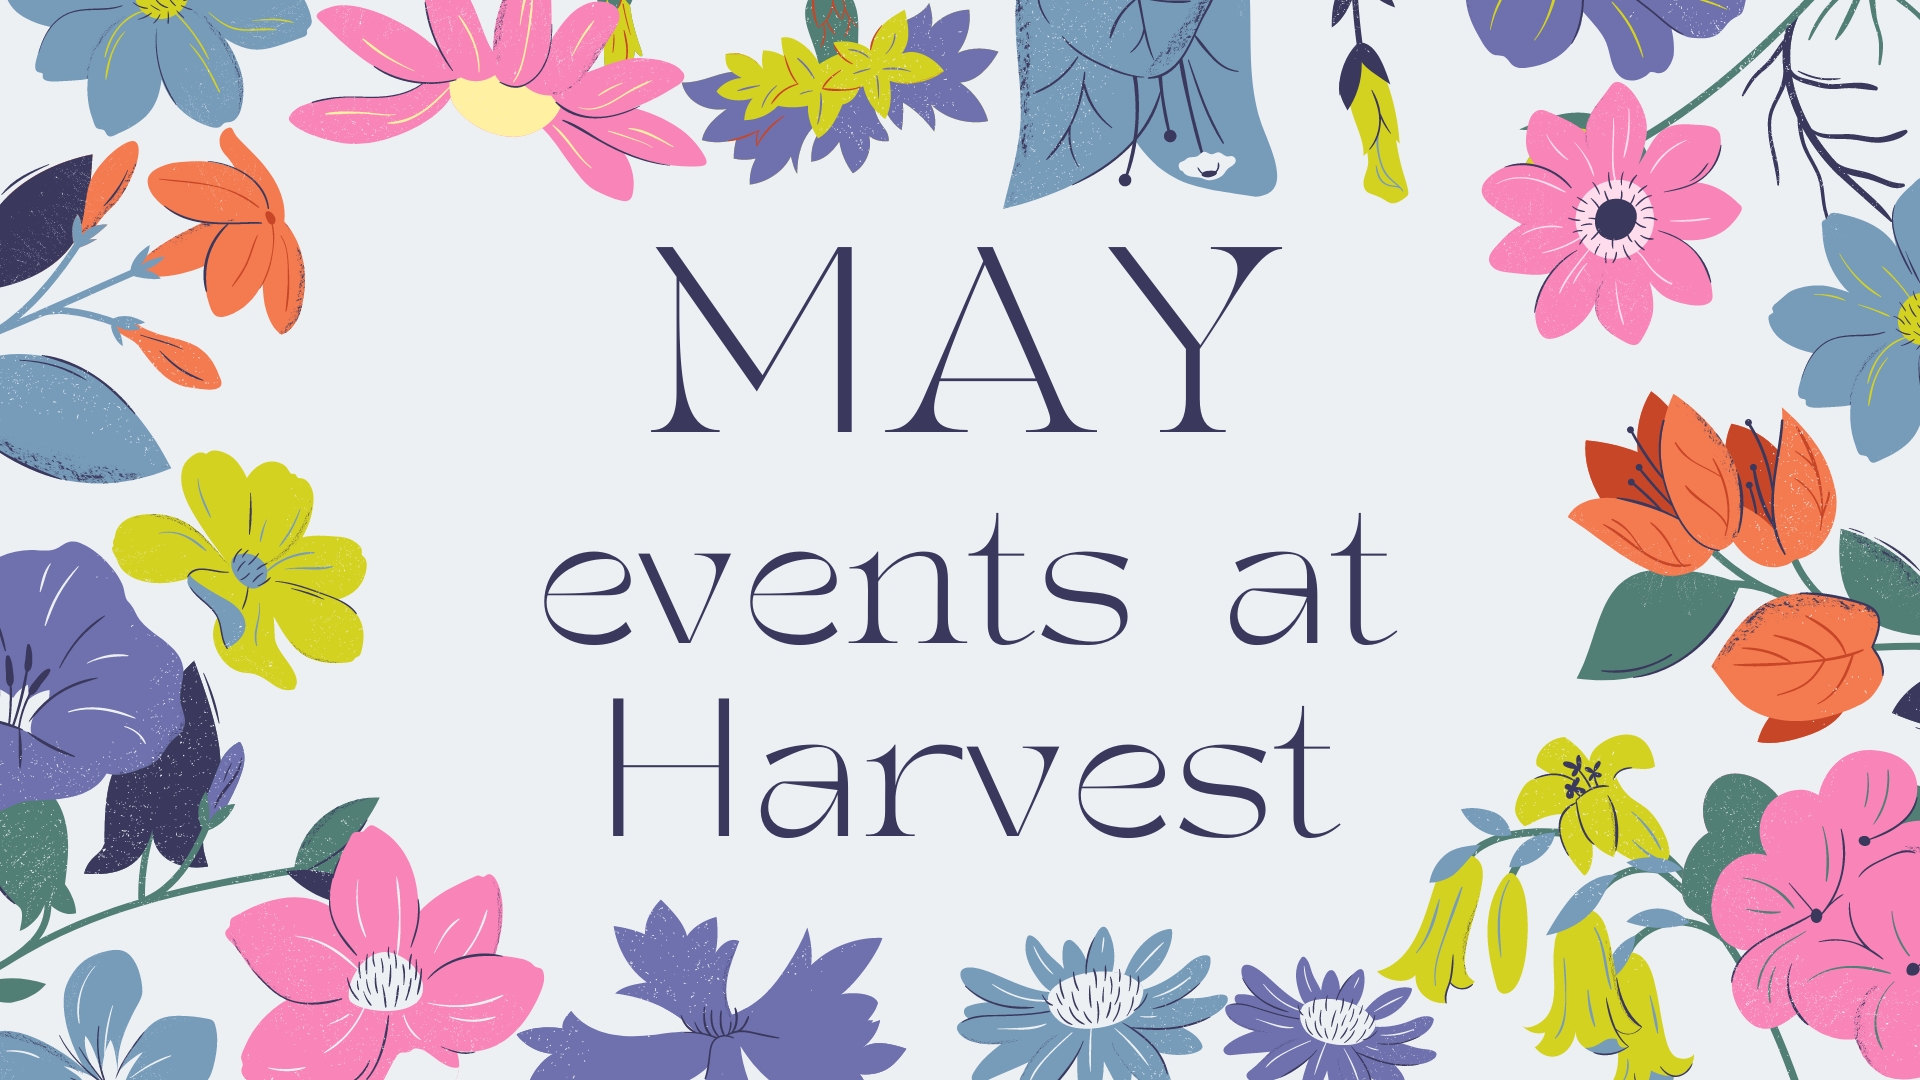 This May at Harvest